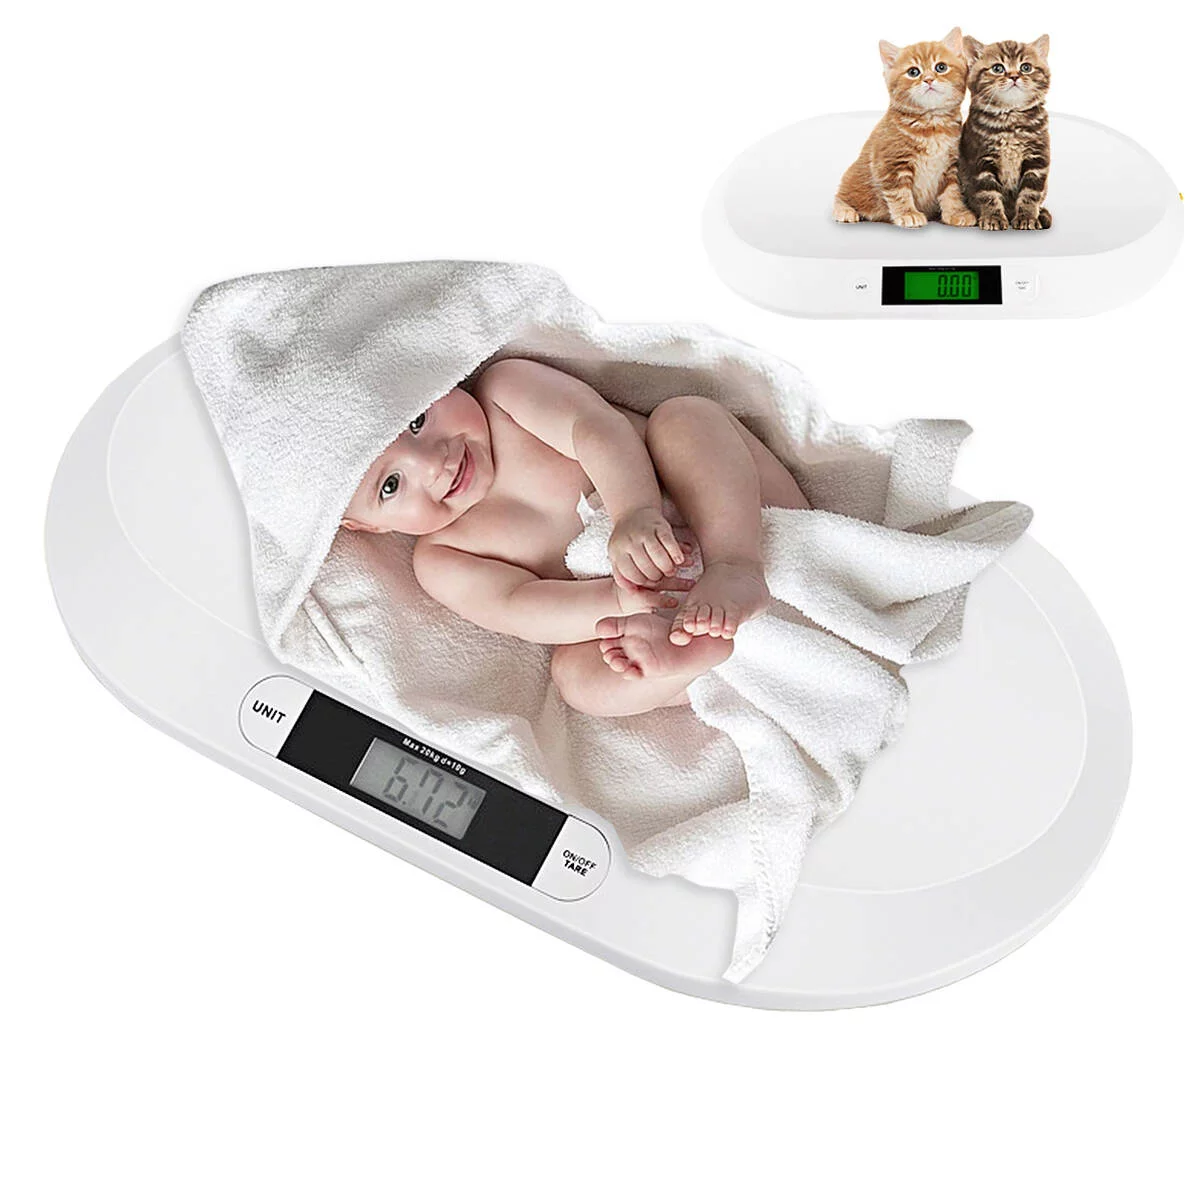 Daehung Industries Baby Weighing Scale | Digital Scale | Babies, Infants,  Adults, Pets, Puppies, Cats, Dogs | Baby Scales - Great for Newborn /